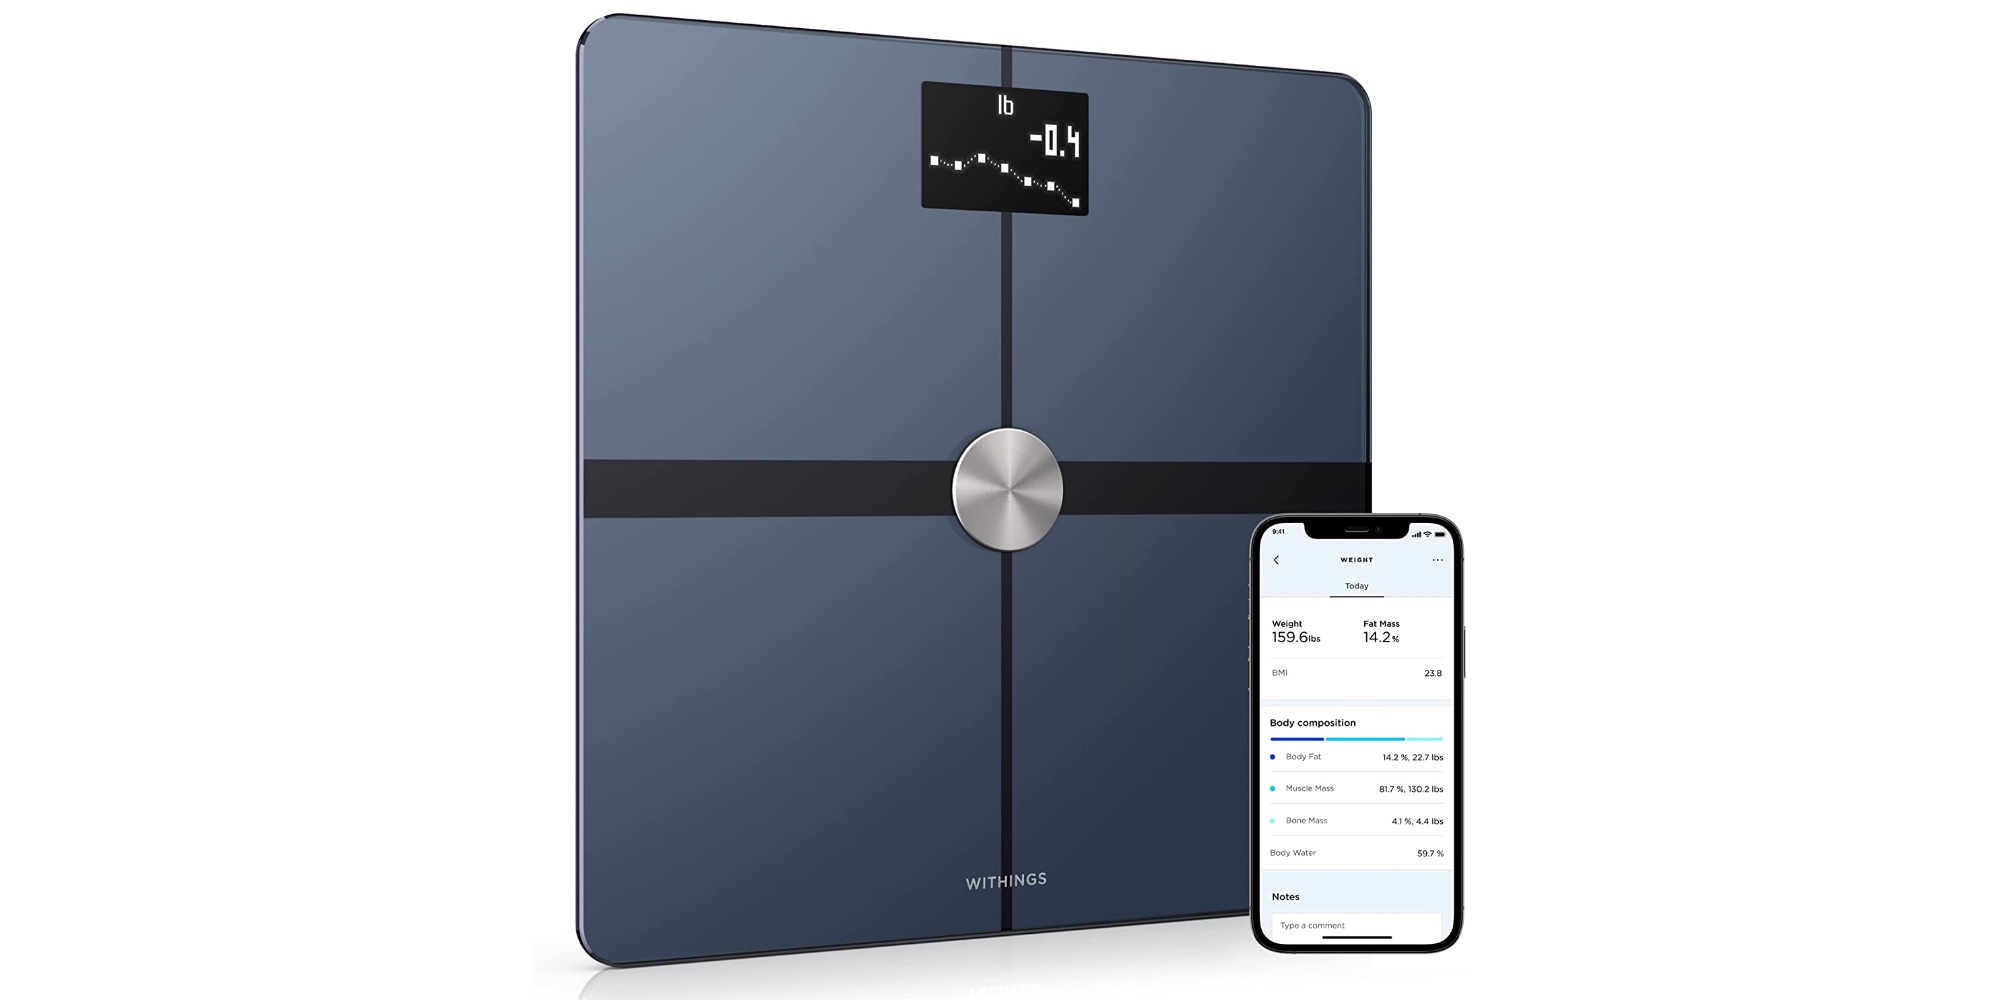 Withings' Body+ smart scale is 41 percent off for today only